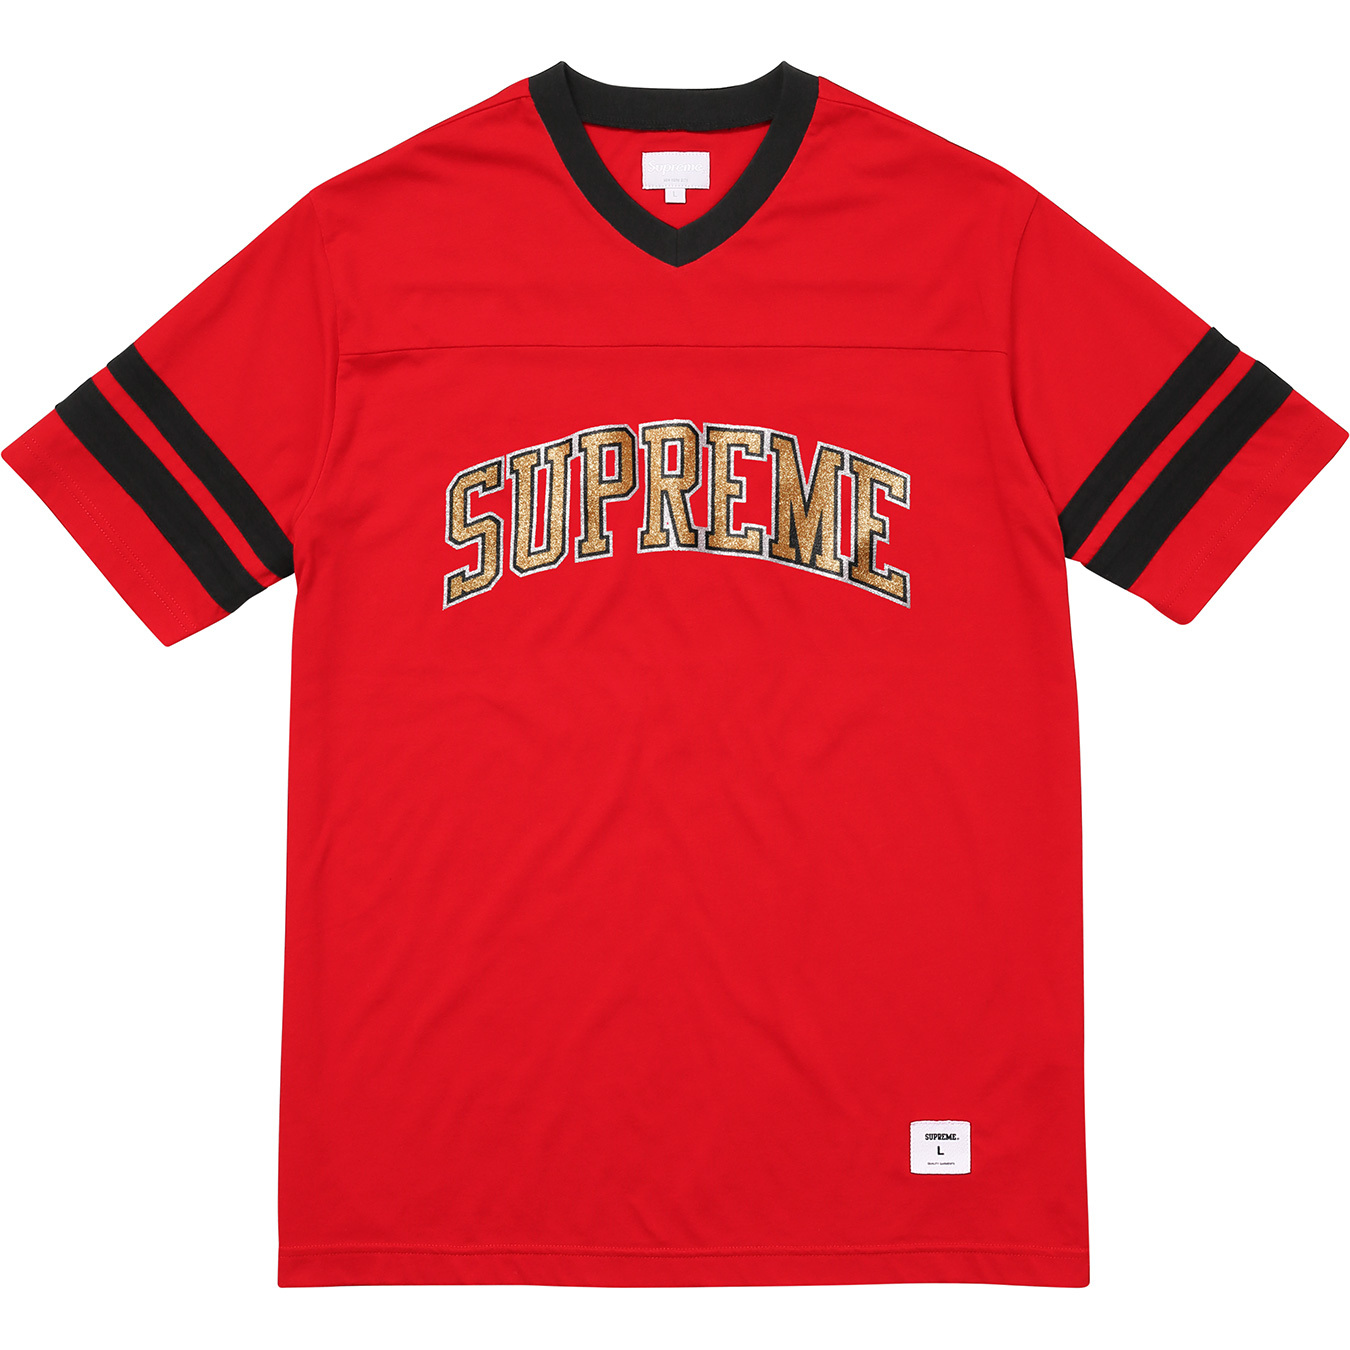 Supreme Glitter Arc Football Top Red - FW17 - US